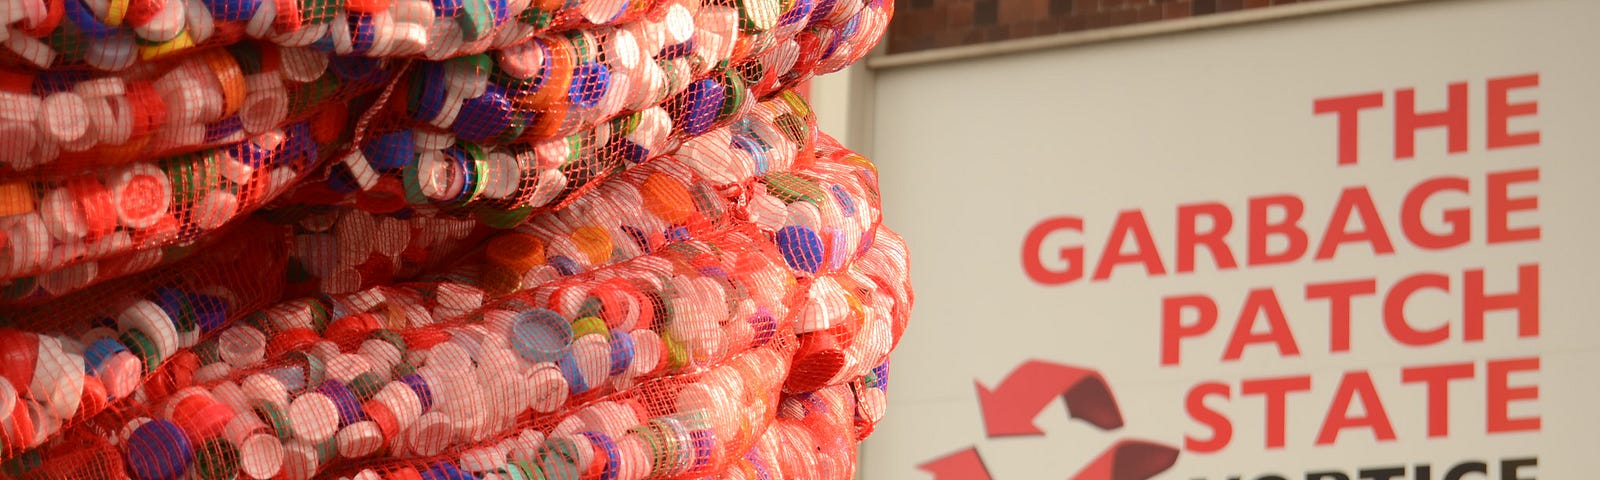 An image of a artwork — a spiral tower made of plastic bottle caps. In the background is a poster saying ‘The Garbage Patch State’ Vortice.